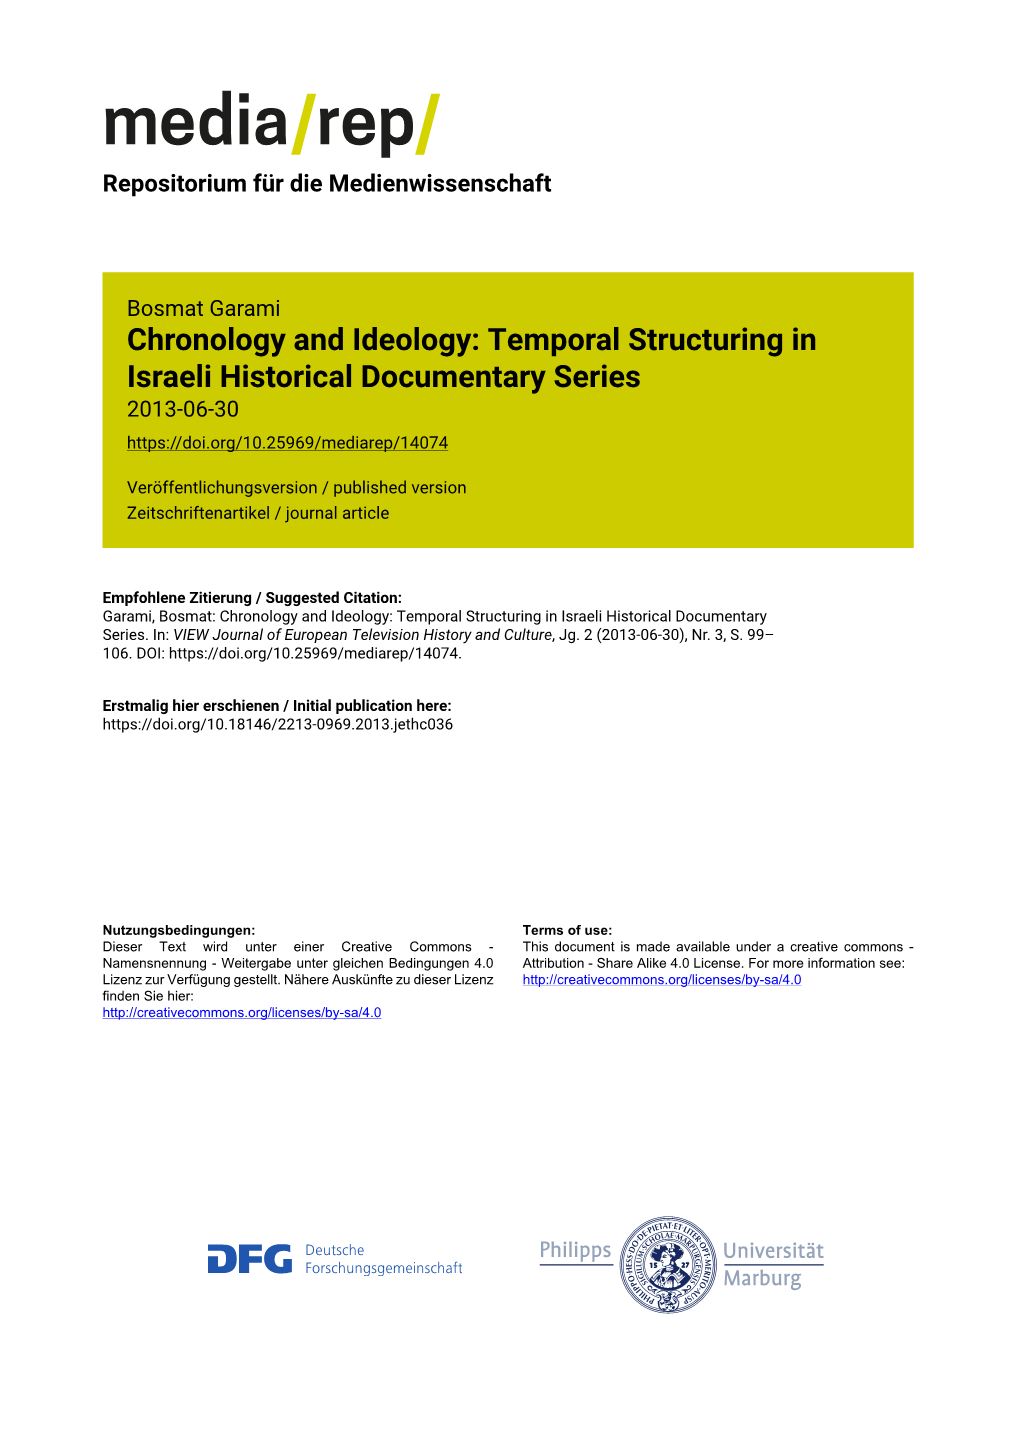 Chronology and Ideology: Temporal Structuring in Israeli Historical Documentary Series 2013-06-30